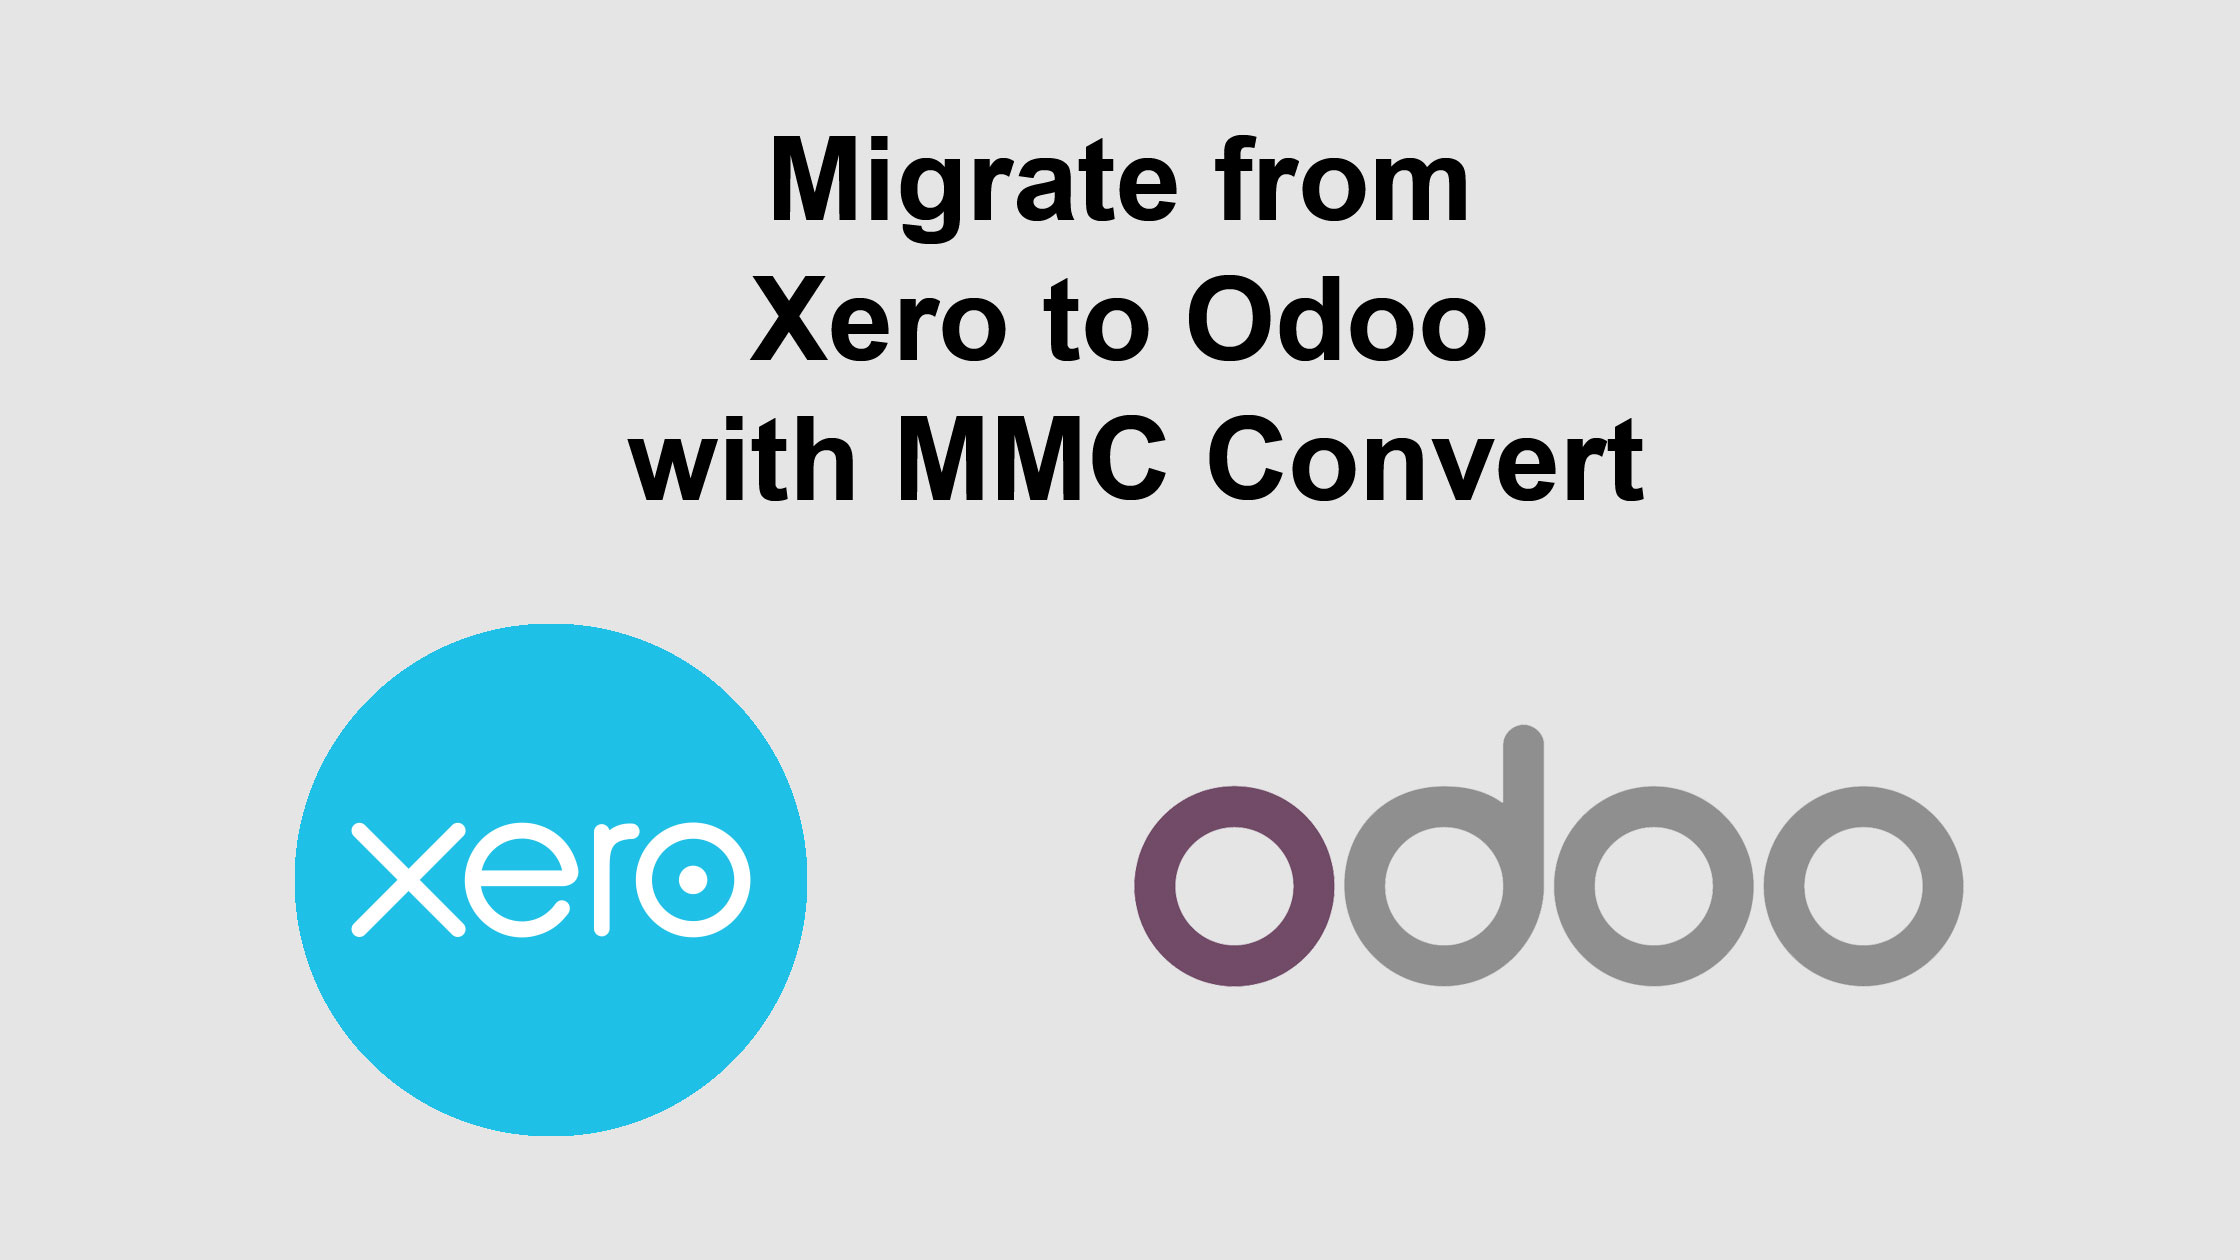 Migrate from Xero to Odoo with MMC Convert